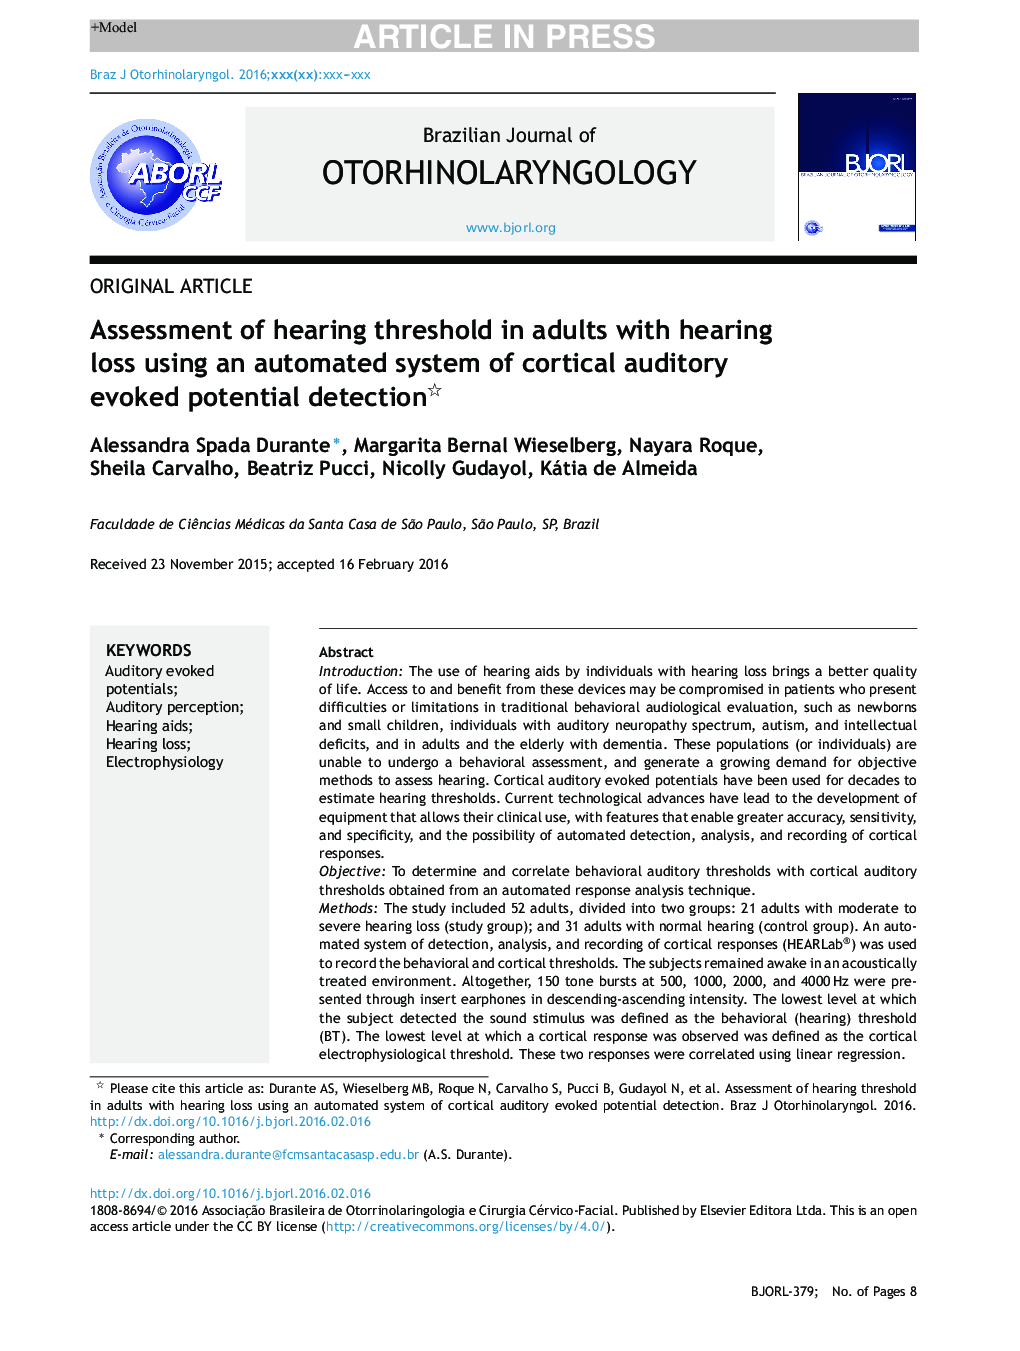 Assessment of hearing threshold in adults with hearing loss using an automated system of cortical auditory evoked potential detection